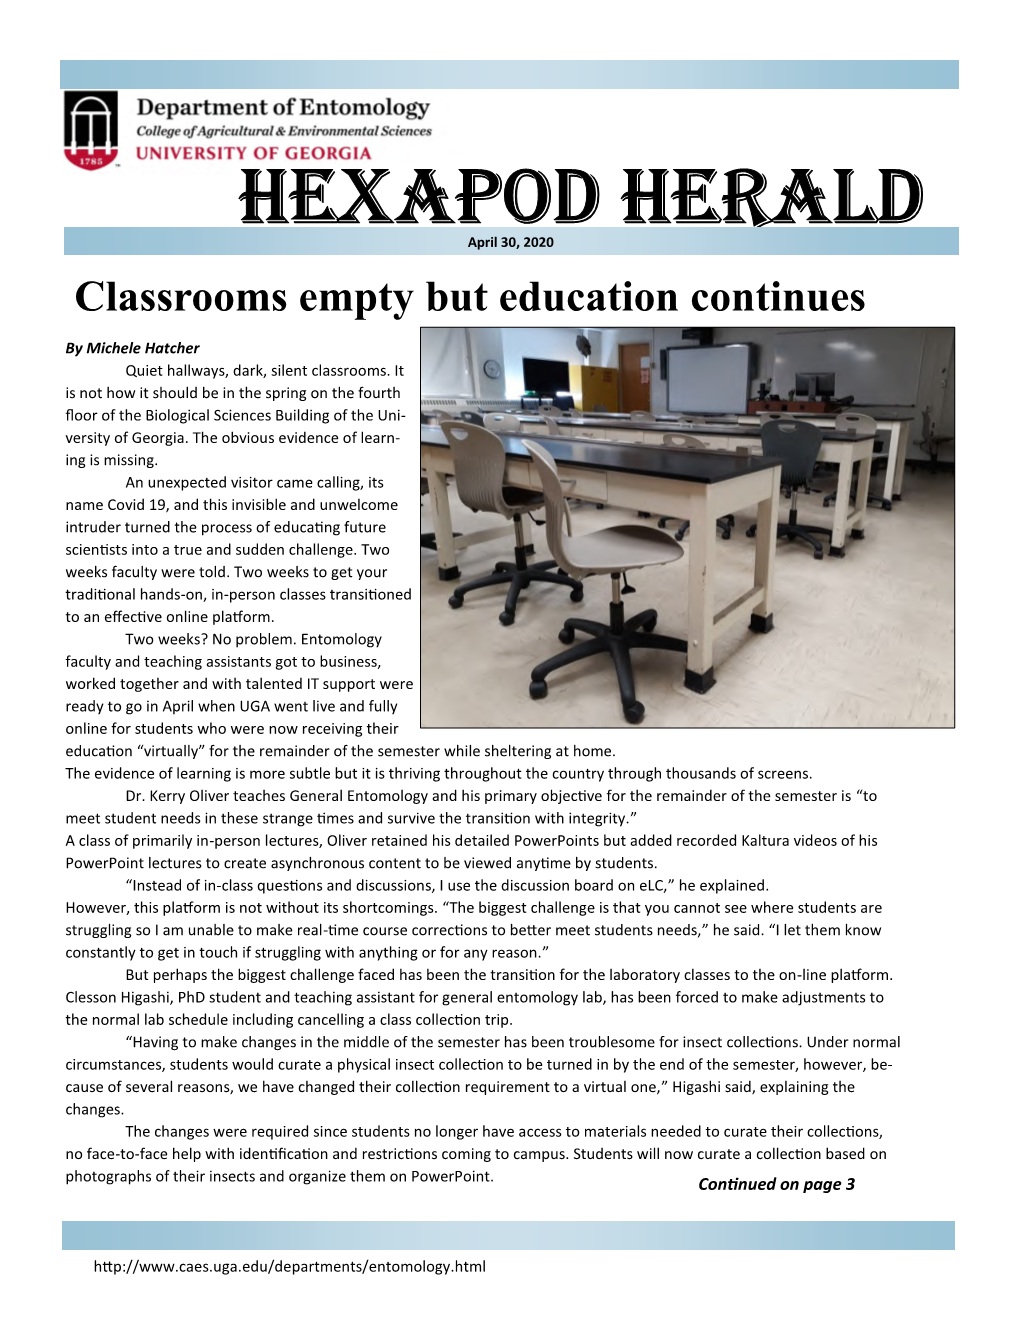 Hexapod Herald April 30, 2020 Classrooms Empty but Education Continues